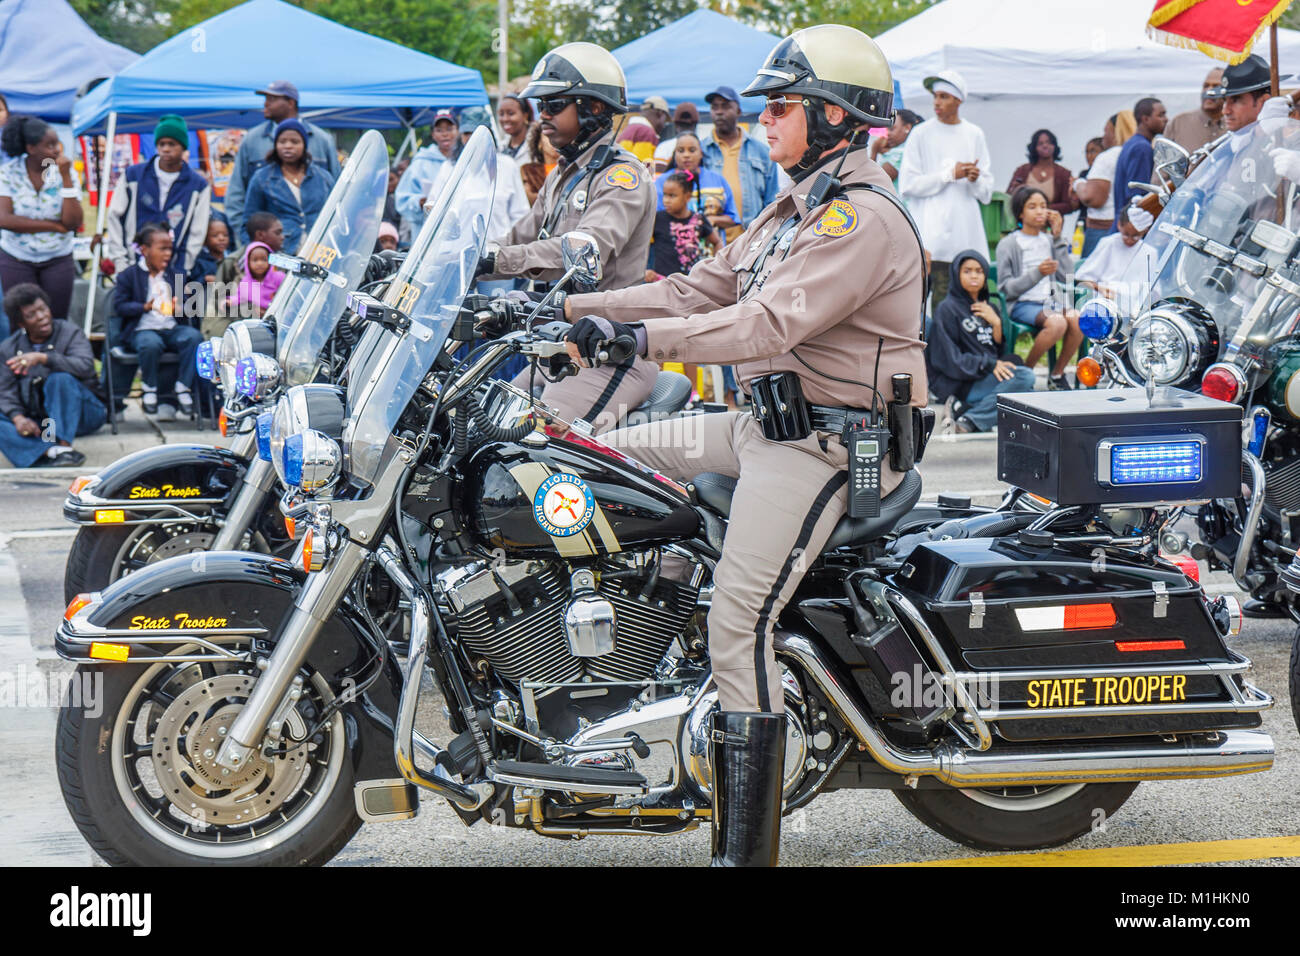 Miami Florida,Liberty City,Martin Luther King Jr. Parade,participant,community police,policeman,motorcycle,state trooper,FL080121011 Stock Photo